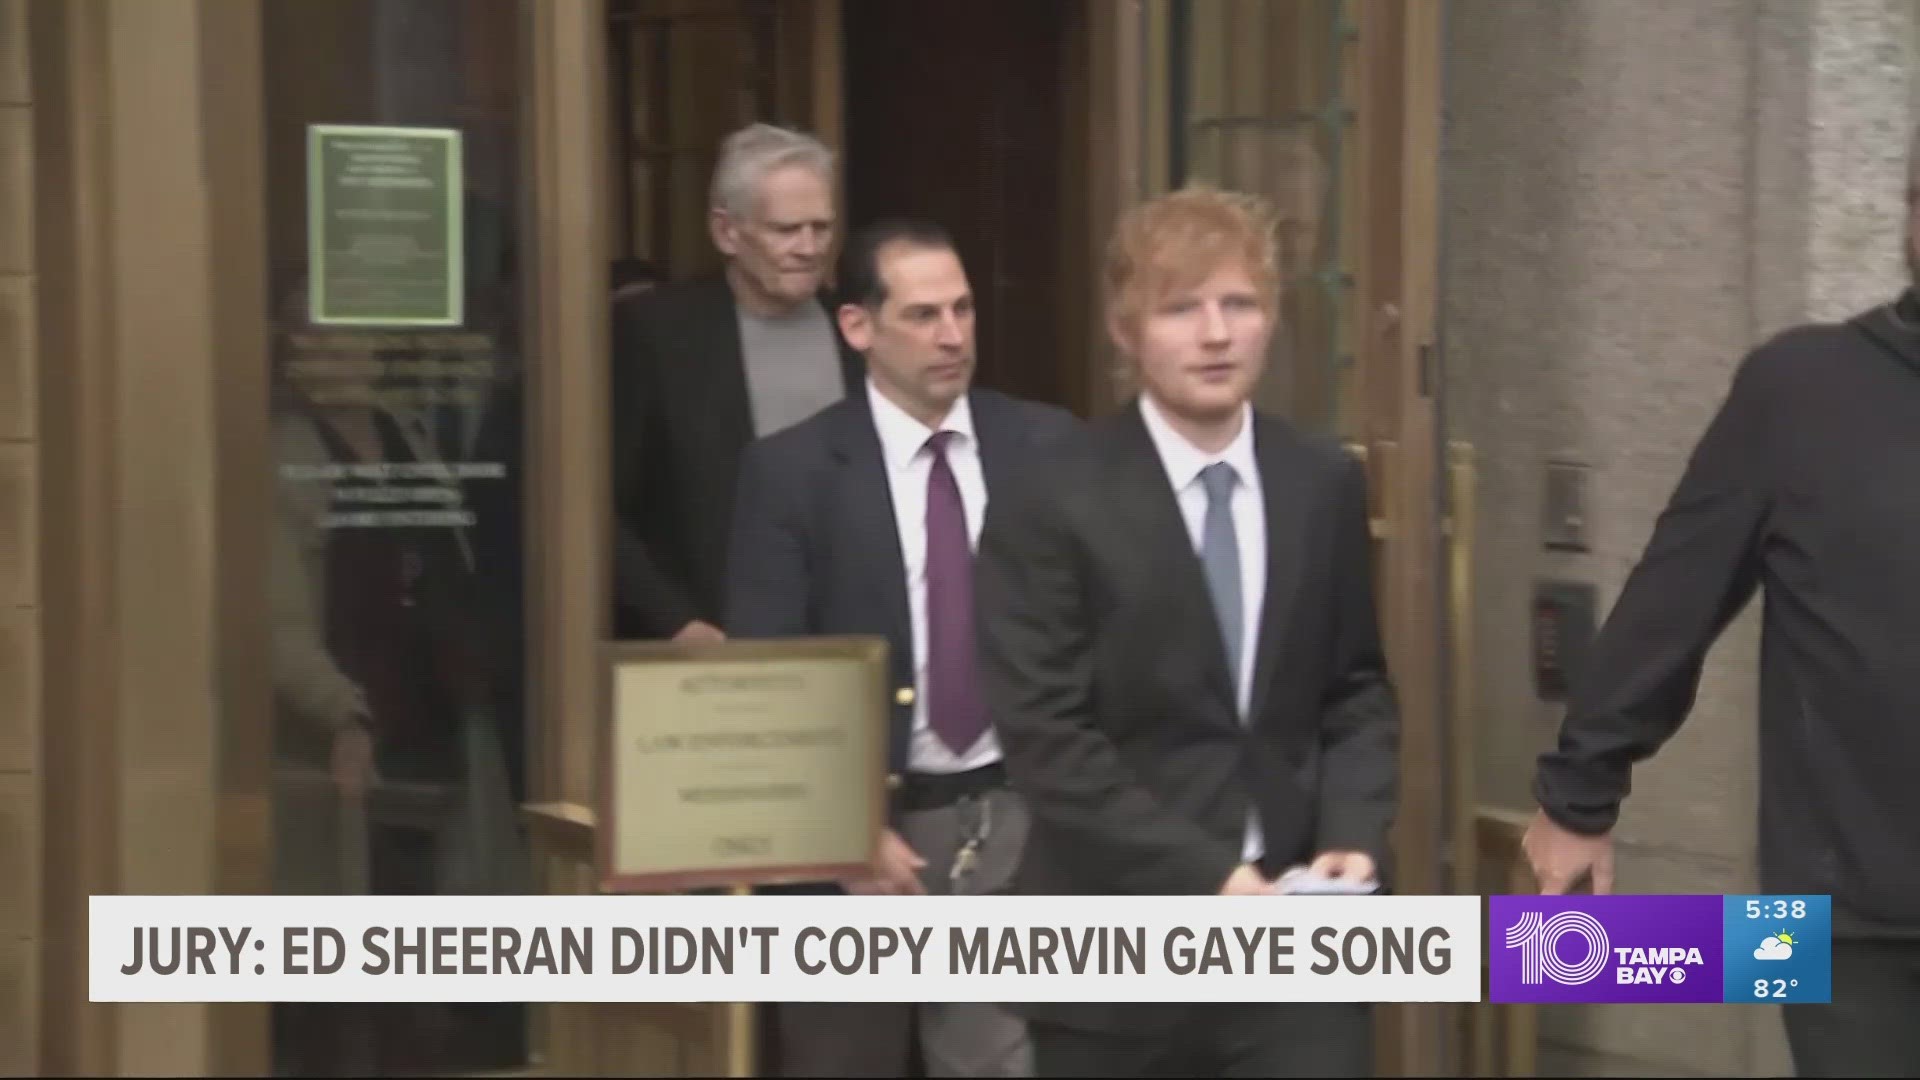 Sheeran addressed reporters after the verdict, revisiting his claim made during the trial that he would consider quitting songwriting if he lost the case.